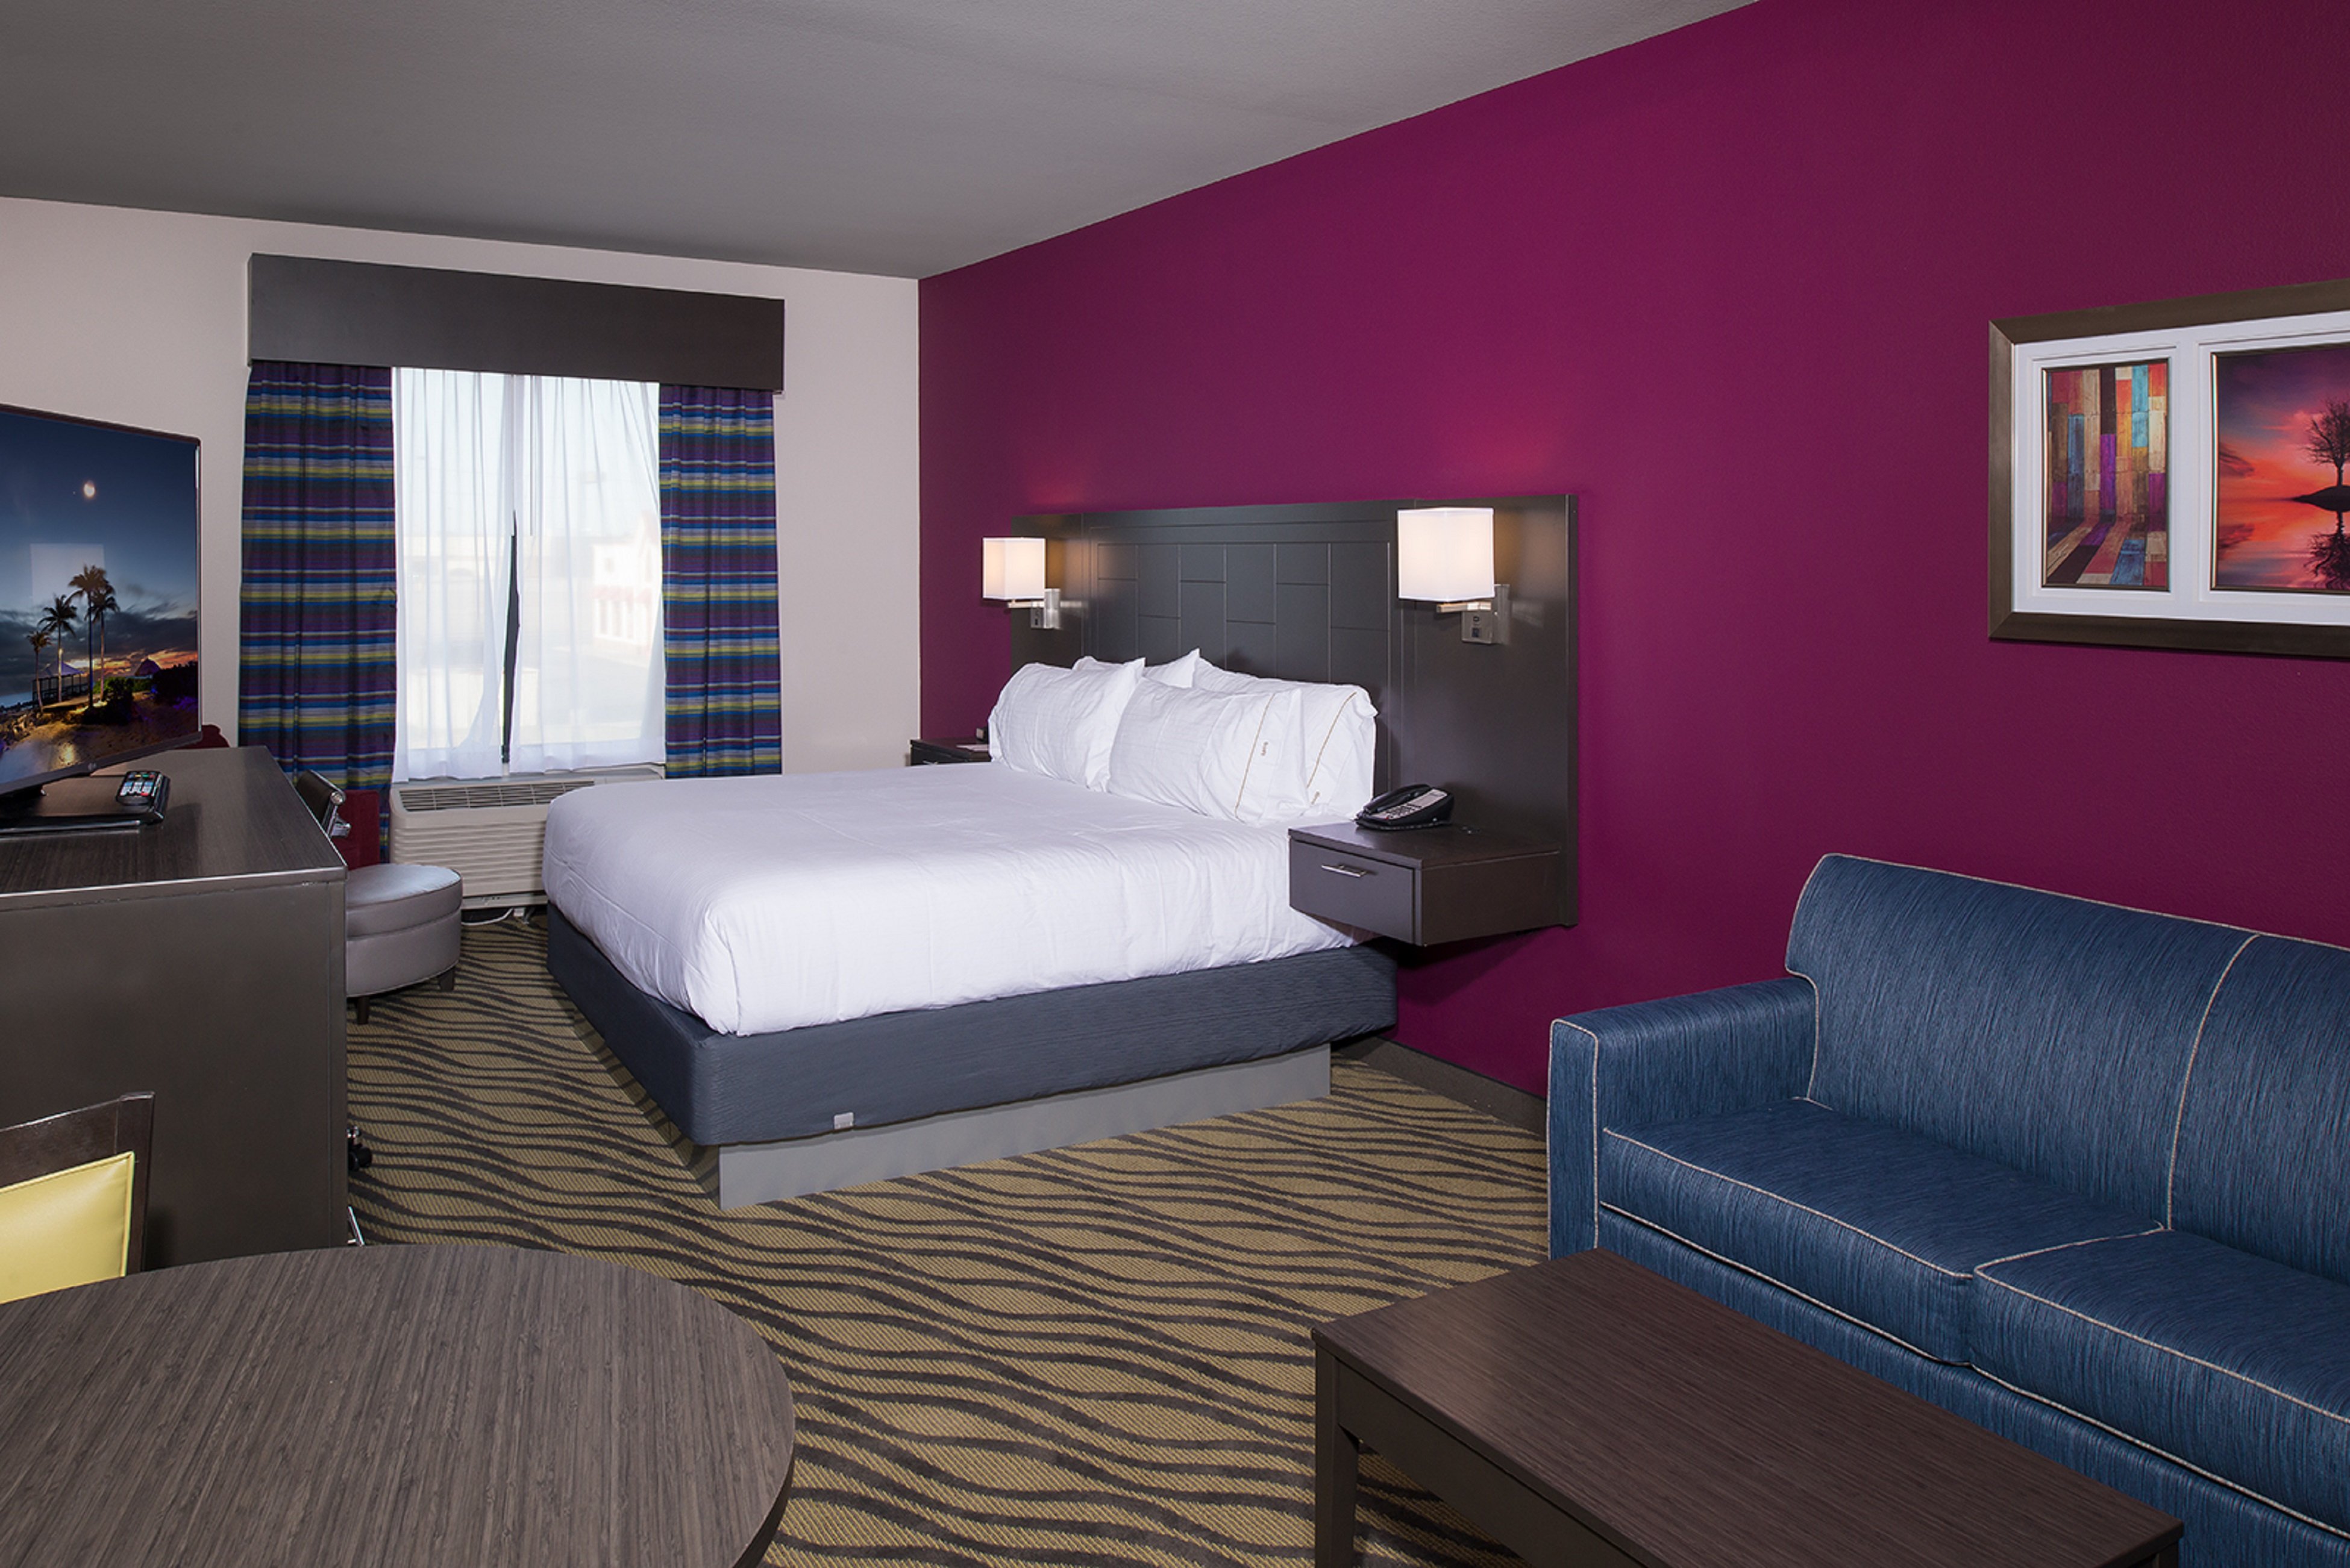 Our King suite is perfect for relaxing before heading Downtown